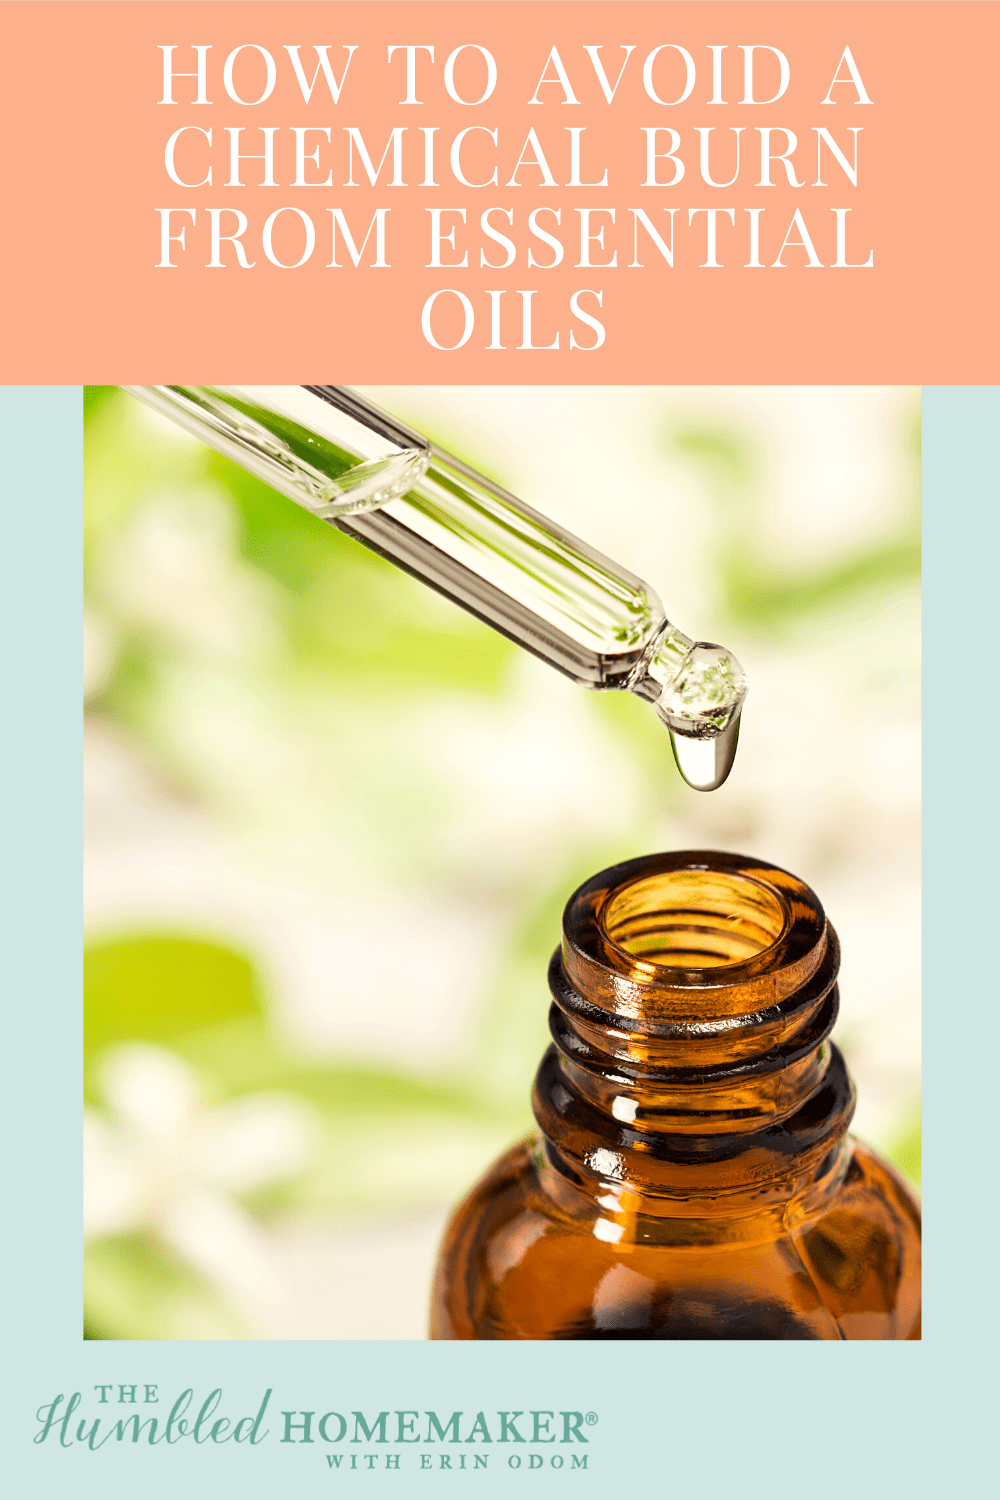 Use essential oils safely! I would have never guessed that this popular essential oil would give me a chemical burn! But it did, and I might now be scarred forever. If only I had better educated myself before using it! 